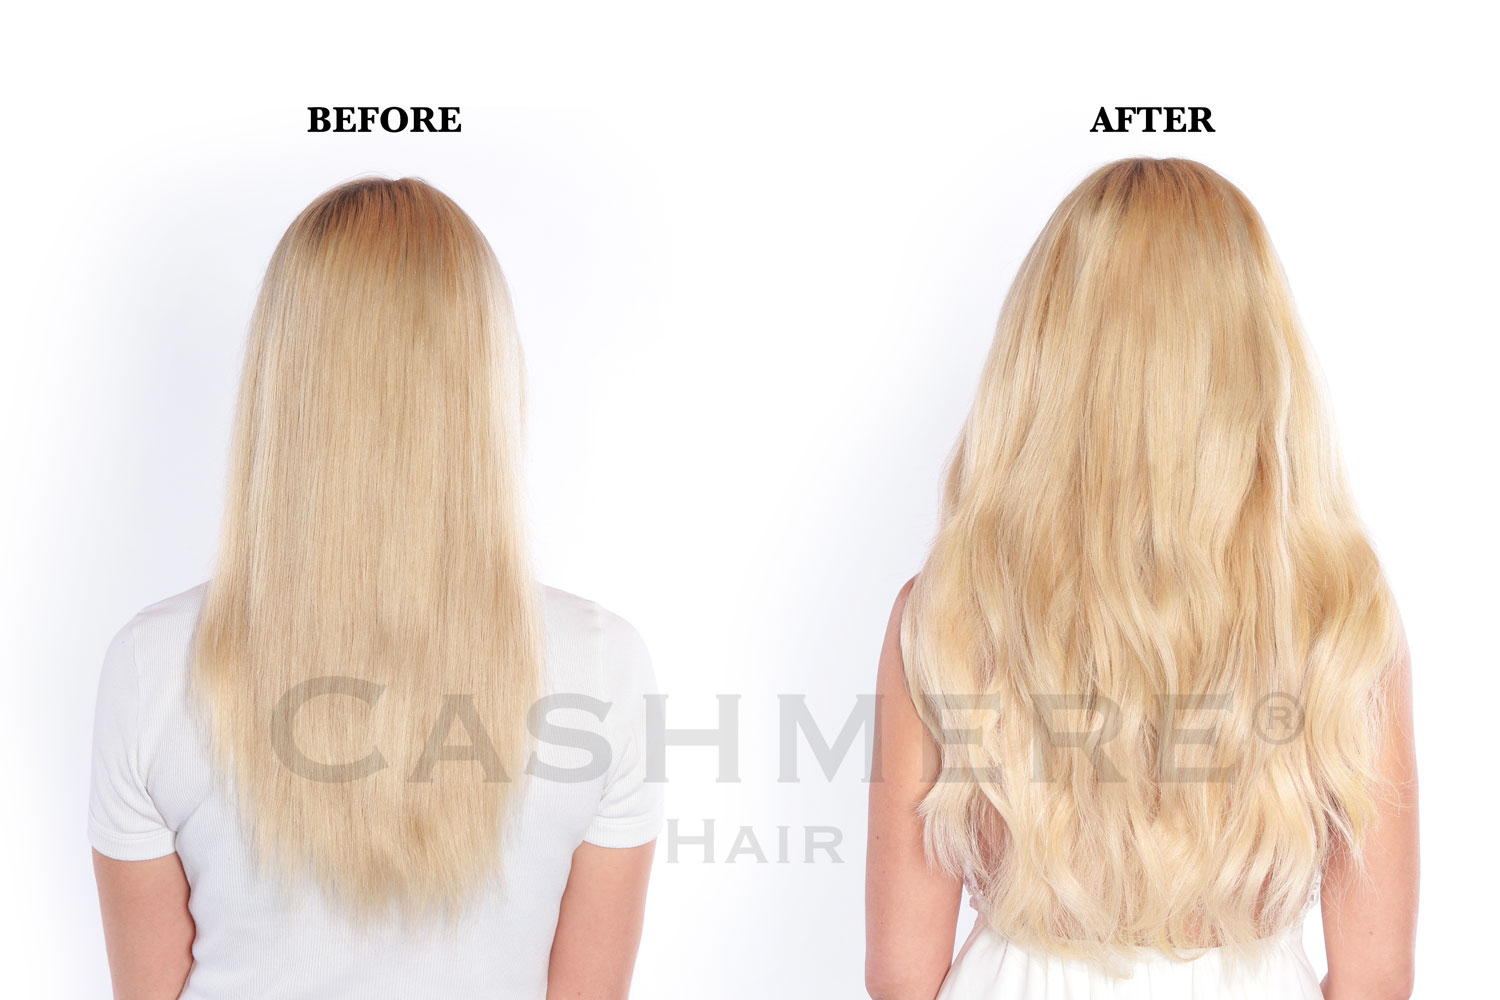 1. Cashmere Hair Extensions in California Blonde - wide 8